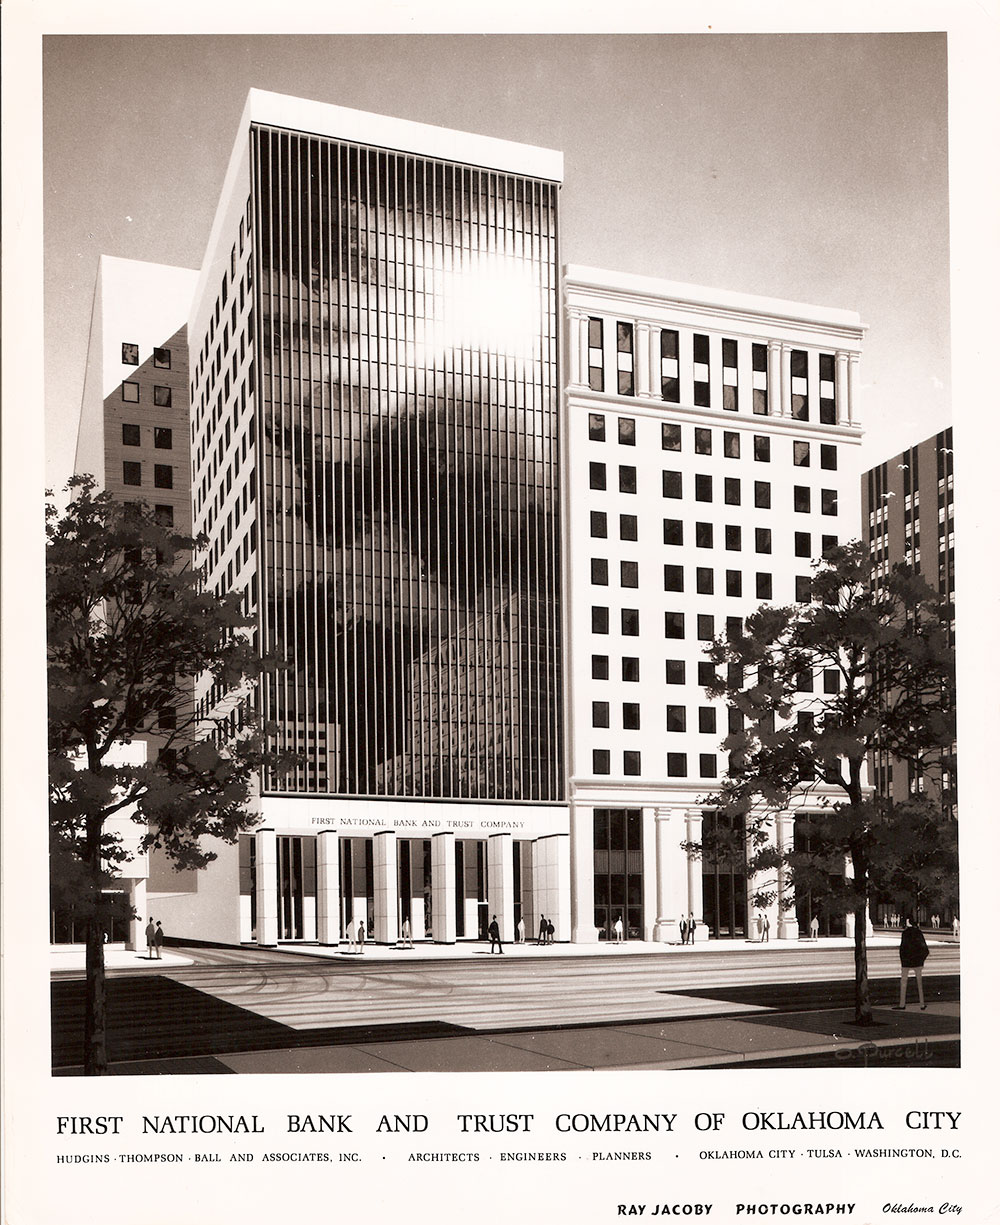 (FNB.2010.3.21) - Architect's Drawing of First National Center Broadway Entrance, c. 1969